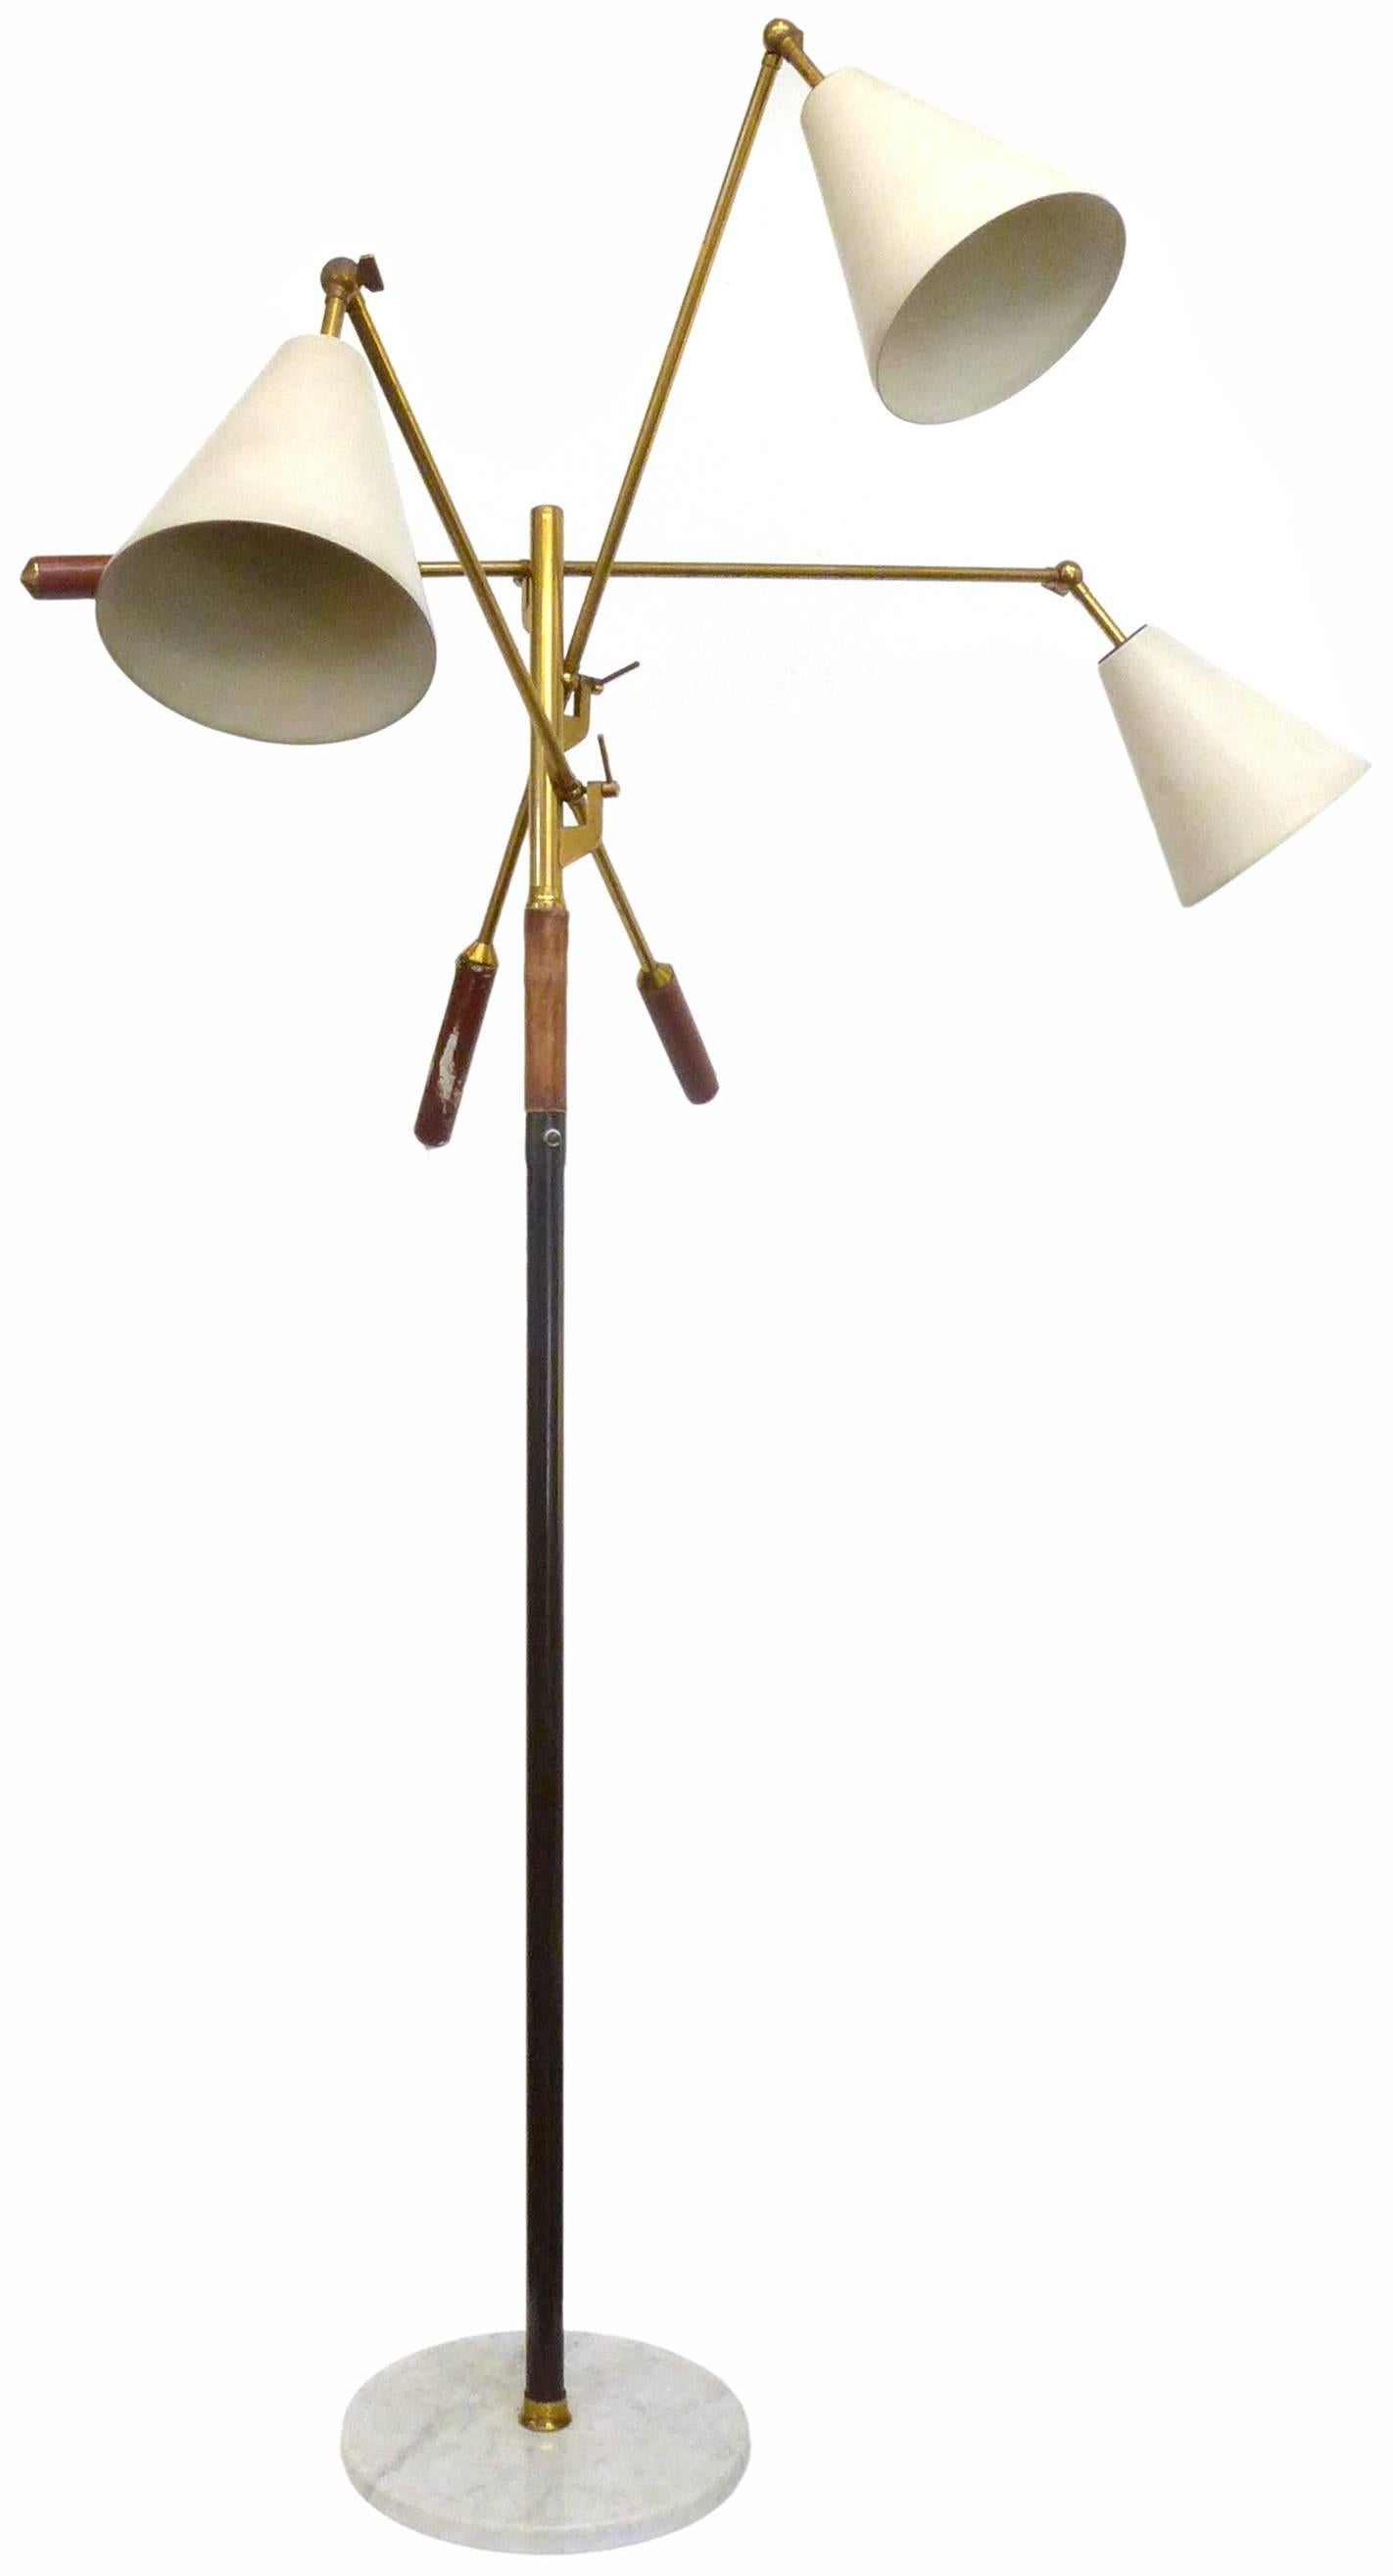 A beautiful and rare Triennale three-light floor lamp by Arredoluce, Italy. A brass shaft and adjustable, articulating arms with stitched, brown, pigskin handles and enamelled, cream metal shades; all seated in a round marble base. Wonderful,